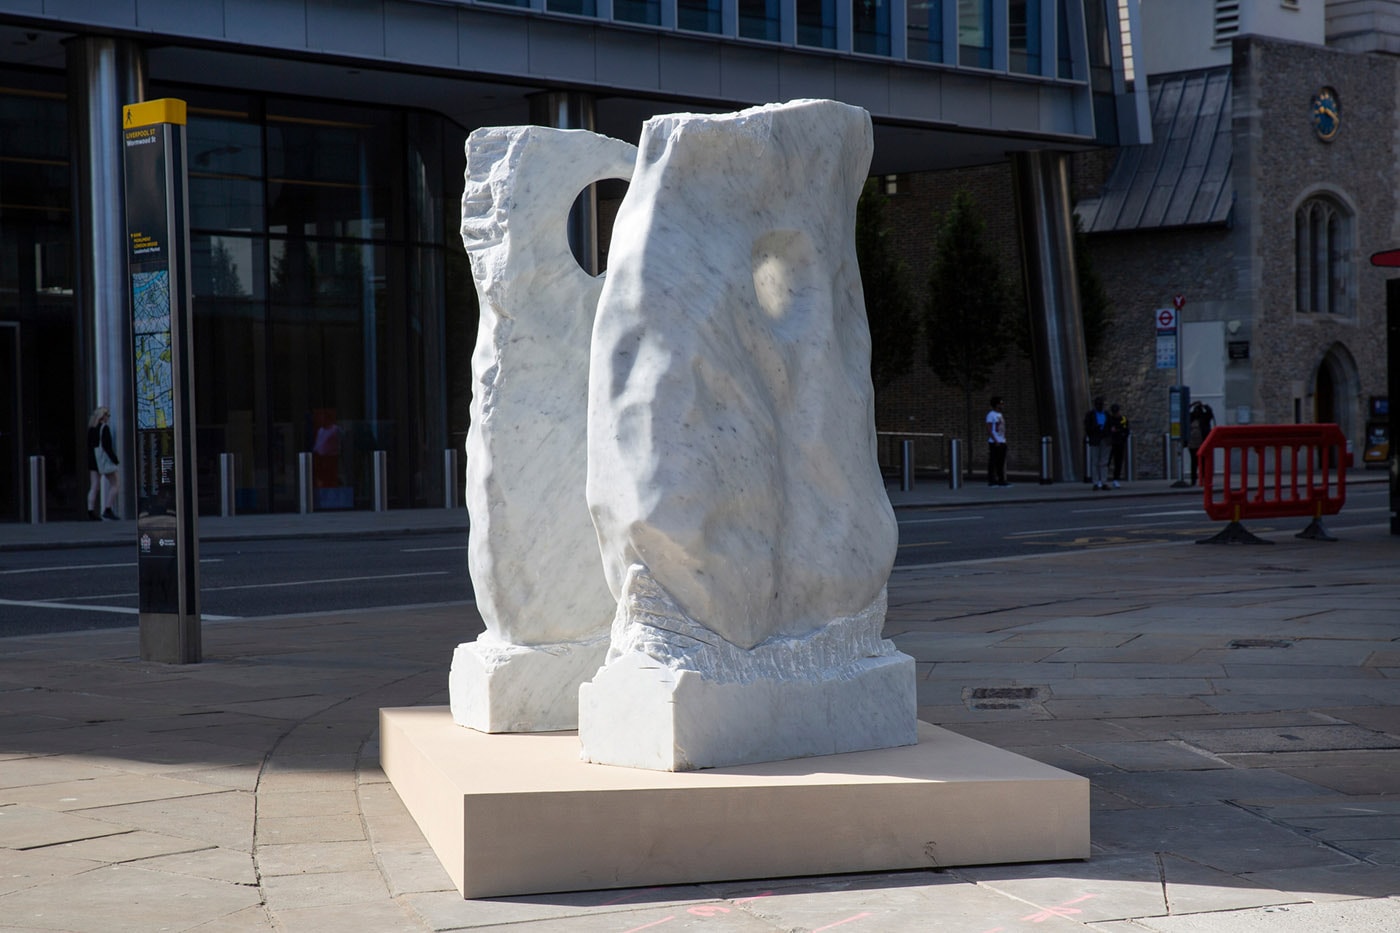 Sculptures Installed Across London's Square Mile Sculpture in the City